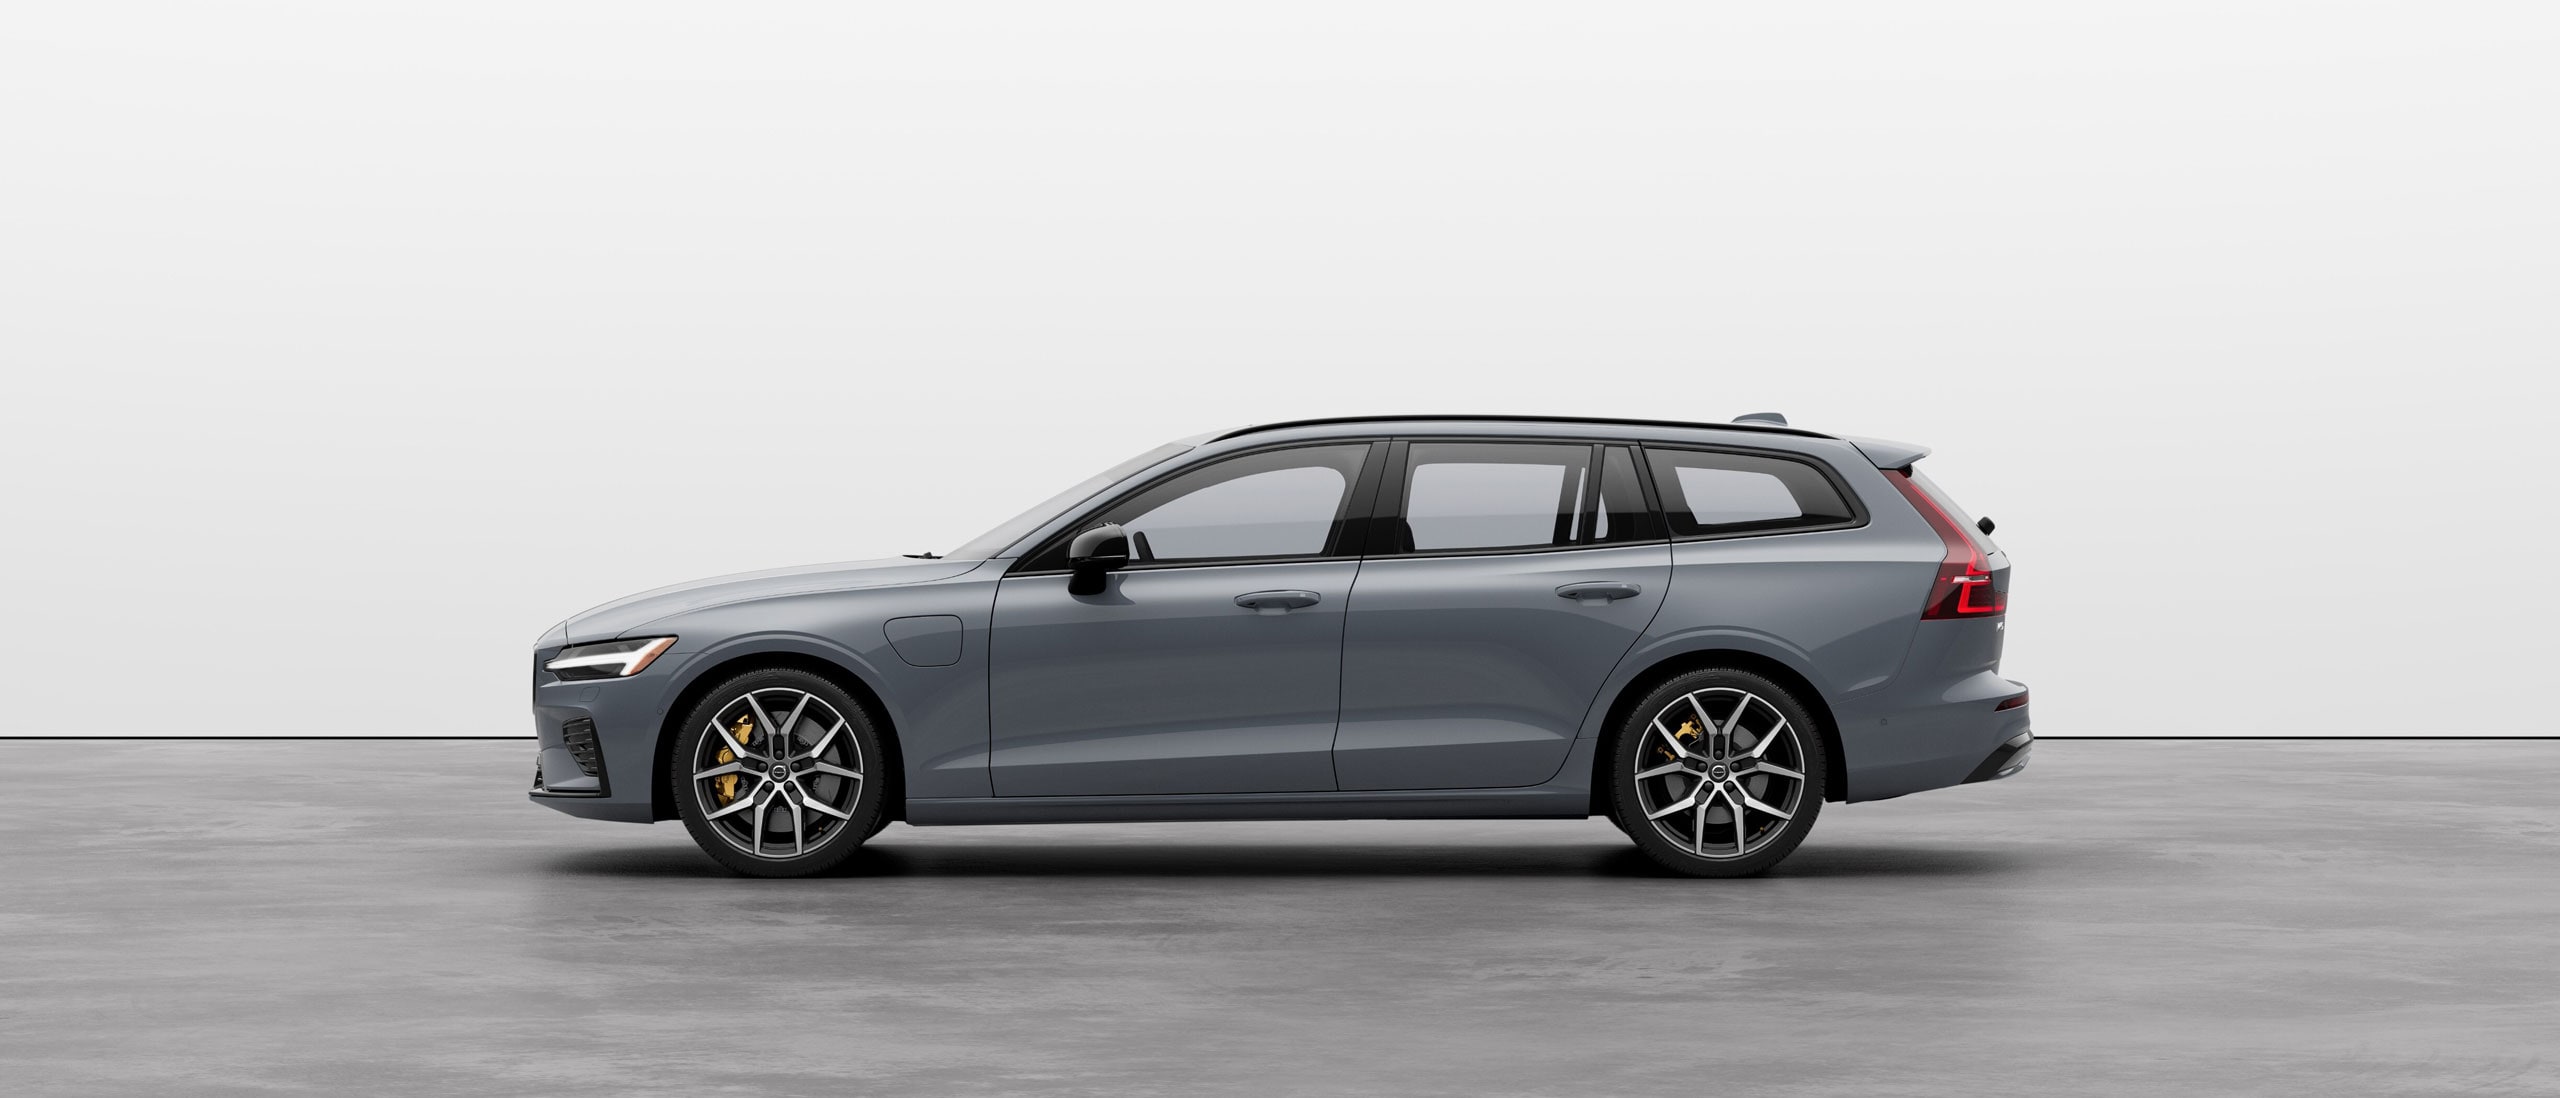 Meet our V60 Recharge plug-in hybrid wagon with Google built-in